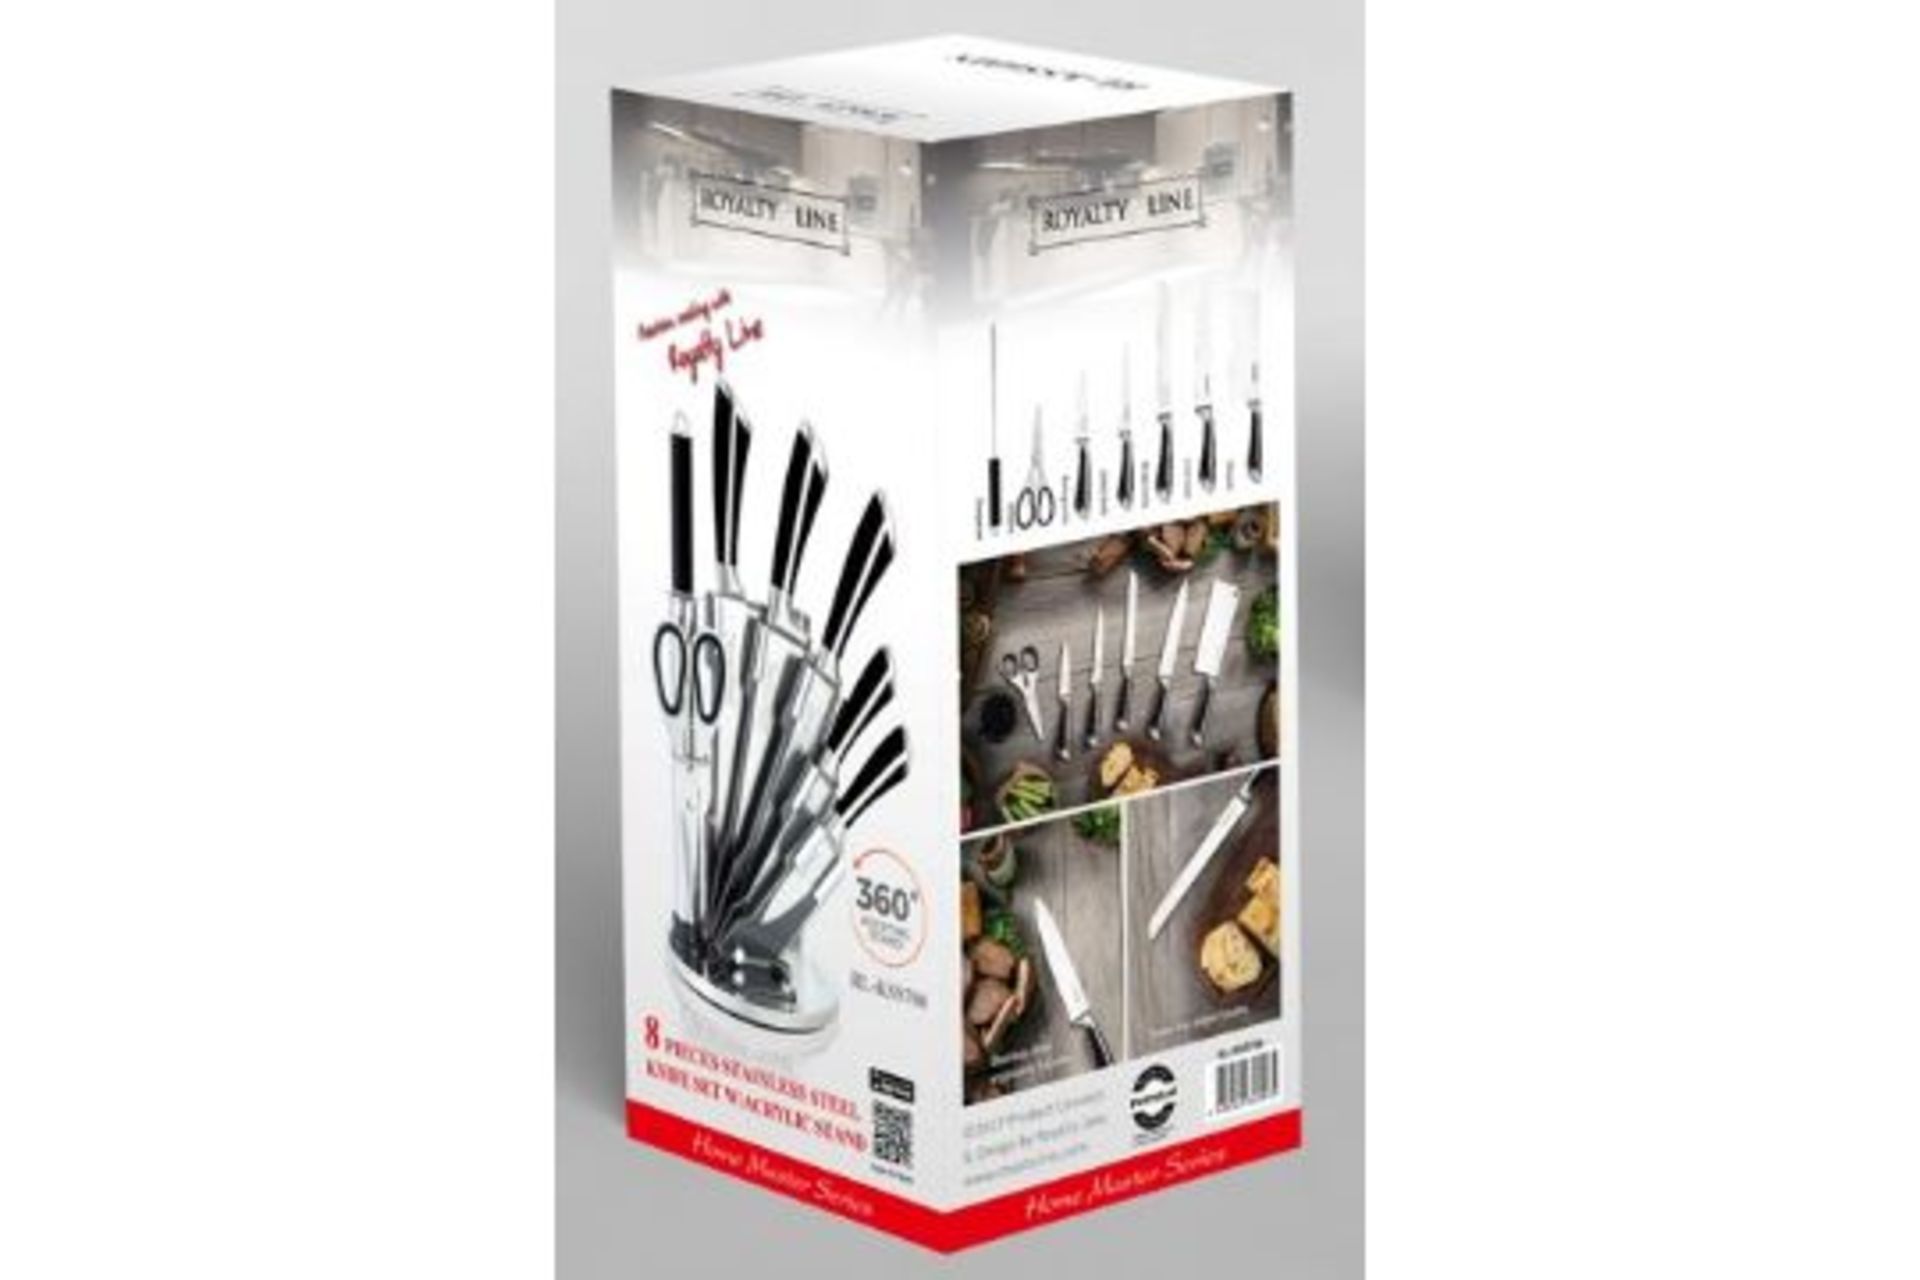 New & Boxed Royalty Line Luxury 8 Piece Stainless Steel KNIFE SET (KSS700) Stainless Steel Material - Image 2 of 2